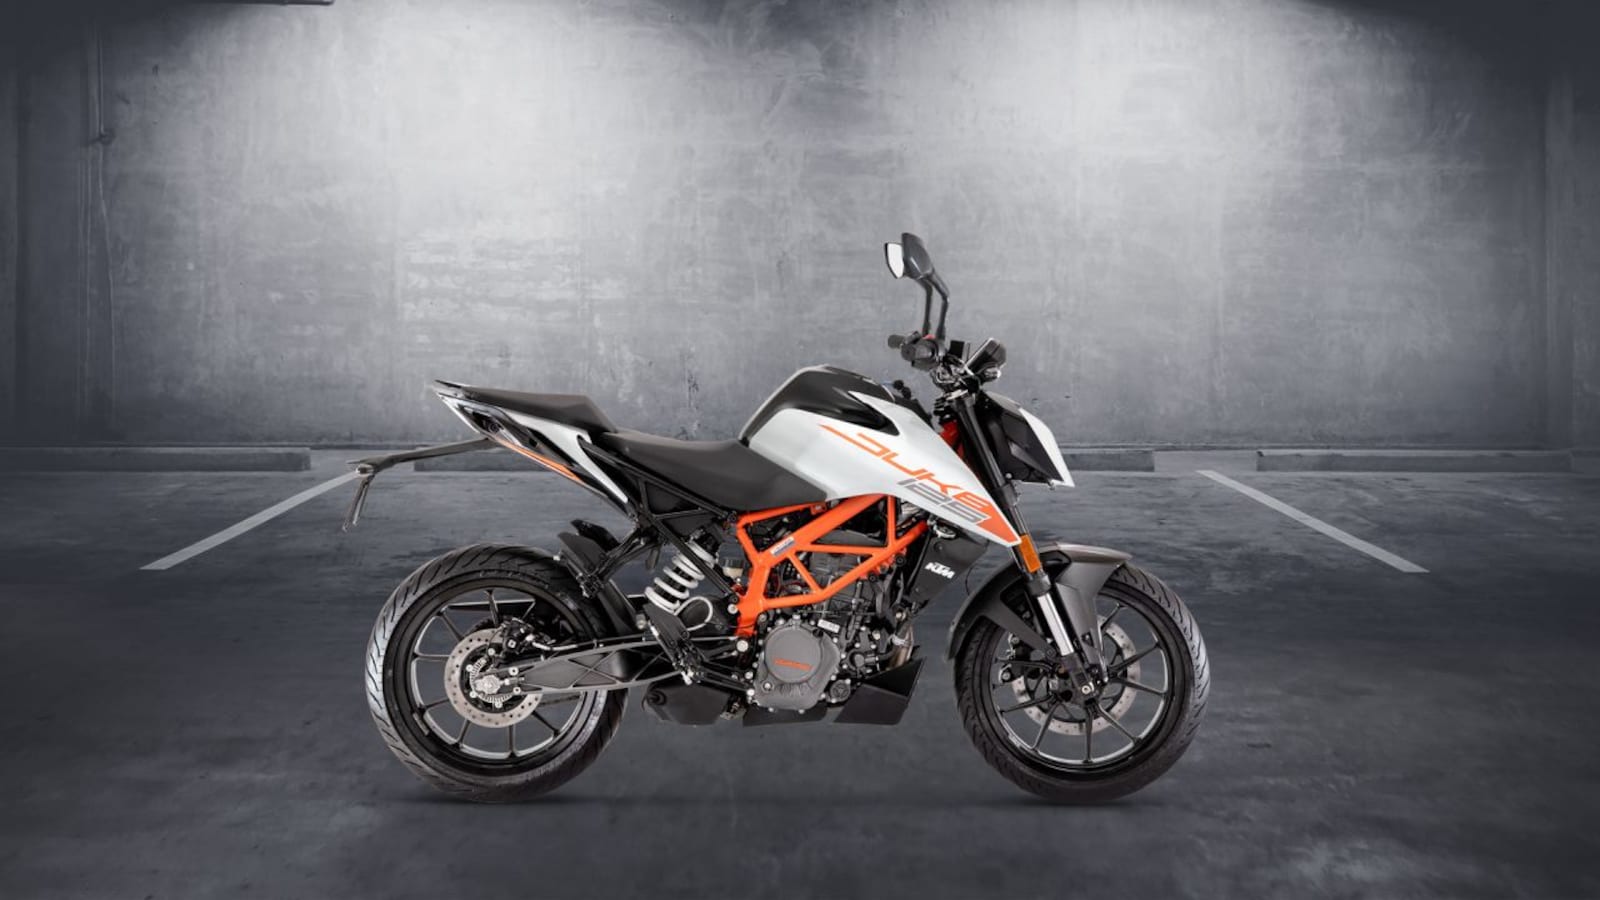 KTM 125 Duke: Everything You Need To Know